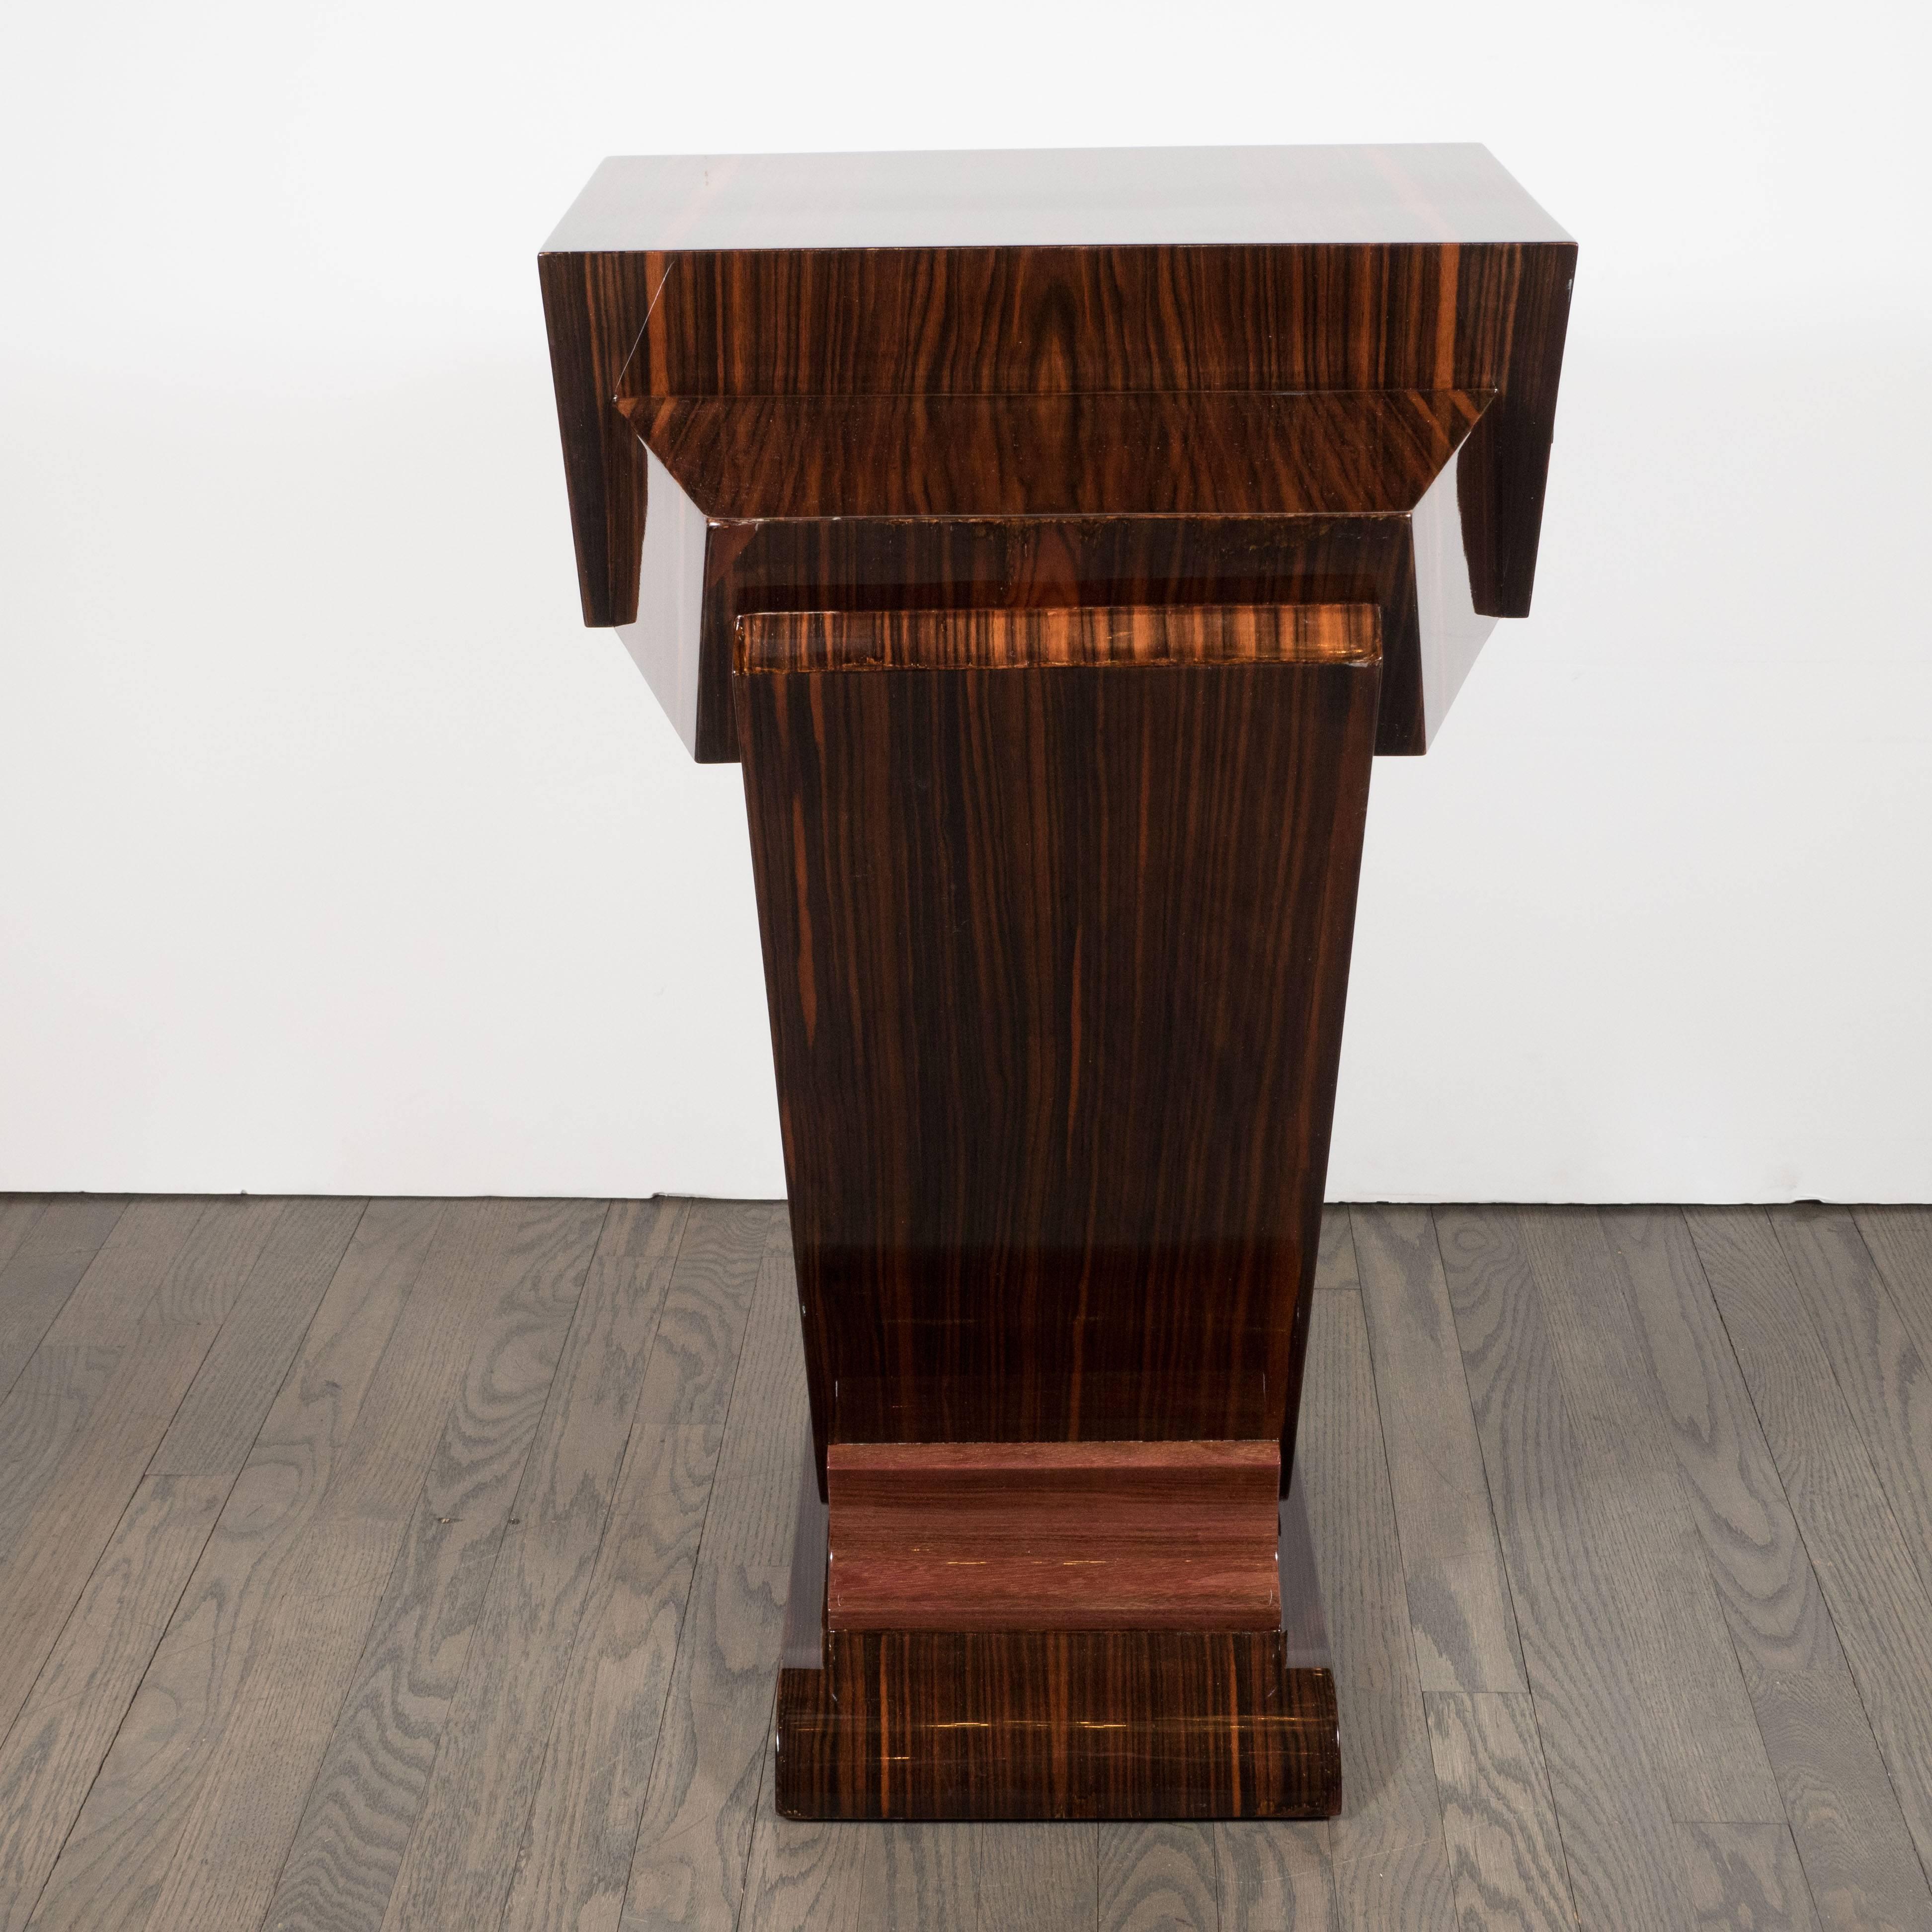  Art Deco Skyscraper Style Console Table in Book-Matched Macassar 3